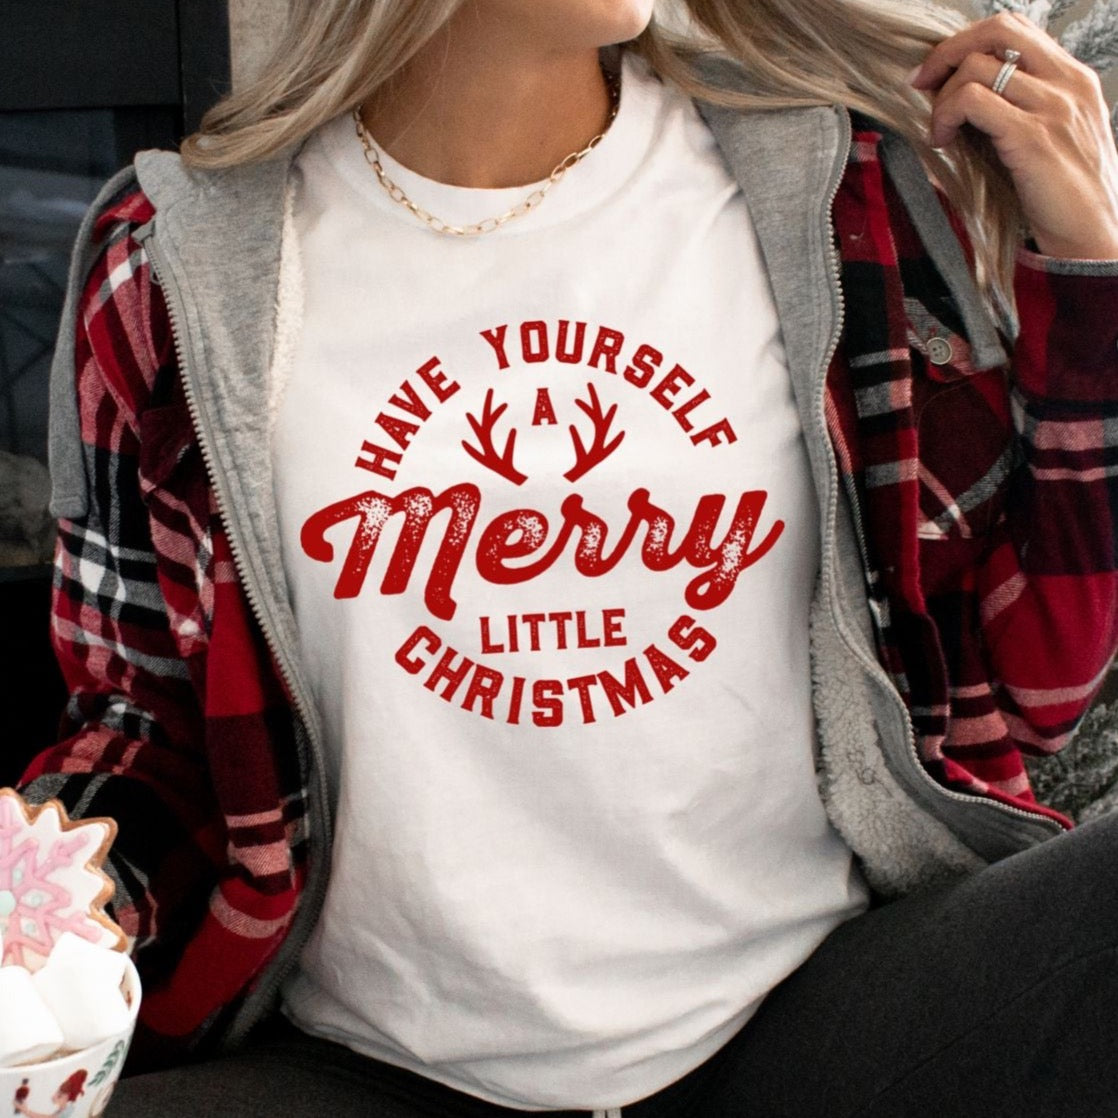 Have Yourself a Merry Little Christmas - Christmas Tee